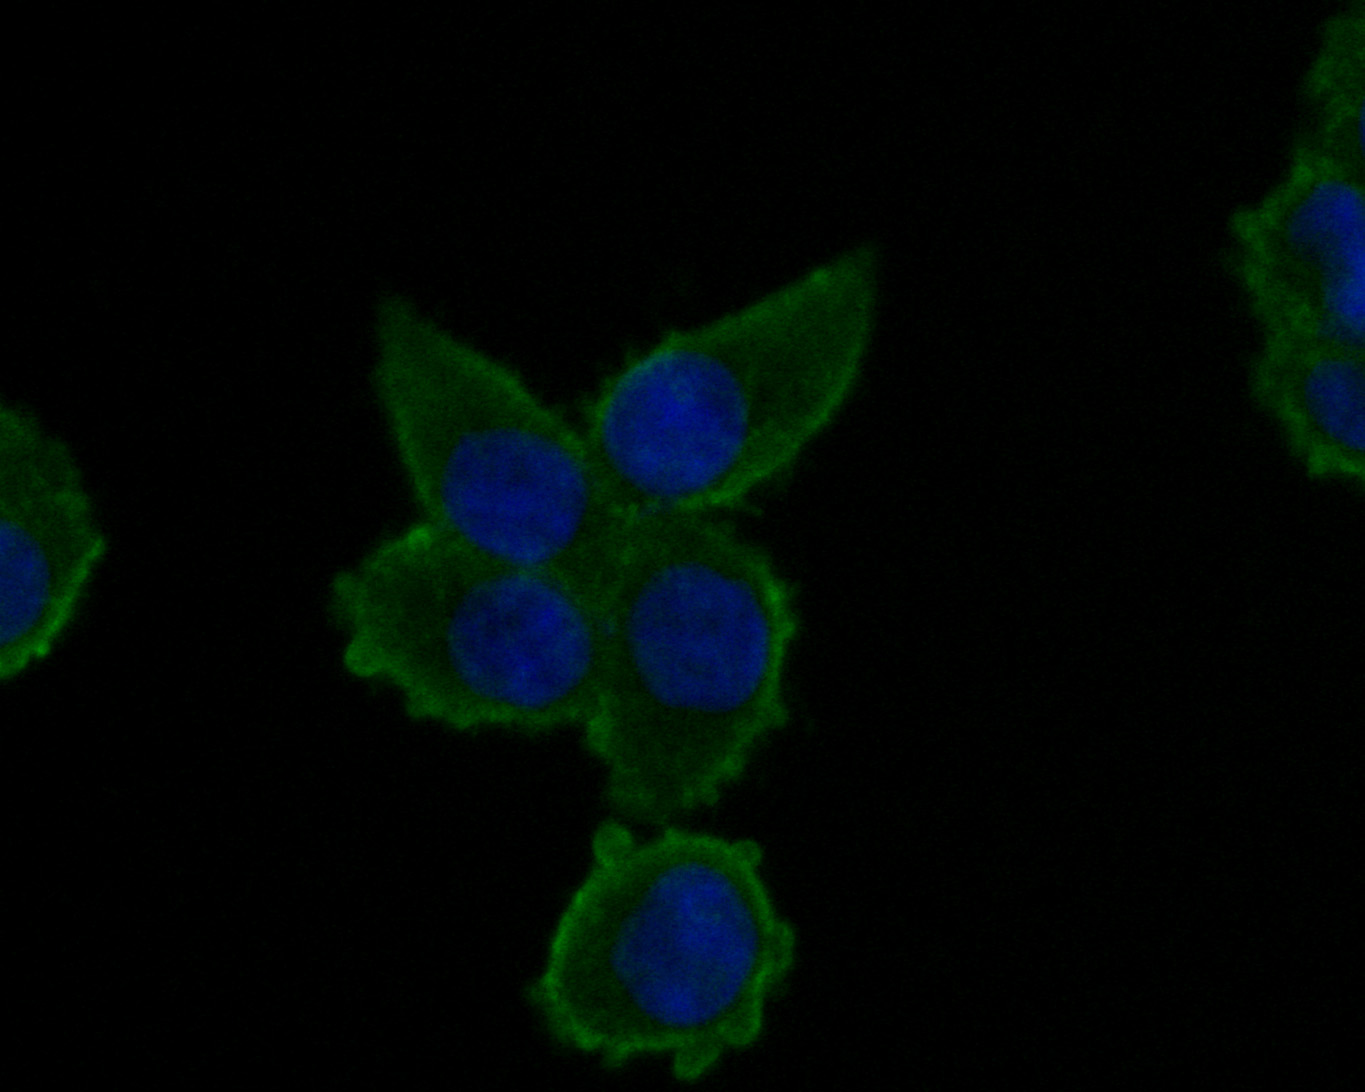 Fig3:; ICC staining of Alpha-2-macroglobulin in Hela cells (green). Formalin fixed cells were permeabilized with 0.1% Triton X-100 in TBS for 10 minutes at room temperature and blocked with 1% Blocker BSA for 15 minutes at room temperature. Cells were probed with the primary antibody ( 1/50) for 1 hour at room temperature, washed with PBS. Alexa Fluor®488 Goat anti-Rabbit IgG was used as the secondary antibody at 1/1,000 dilution. The nuclear counter stain is DAPI (blue).